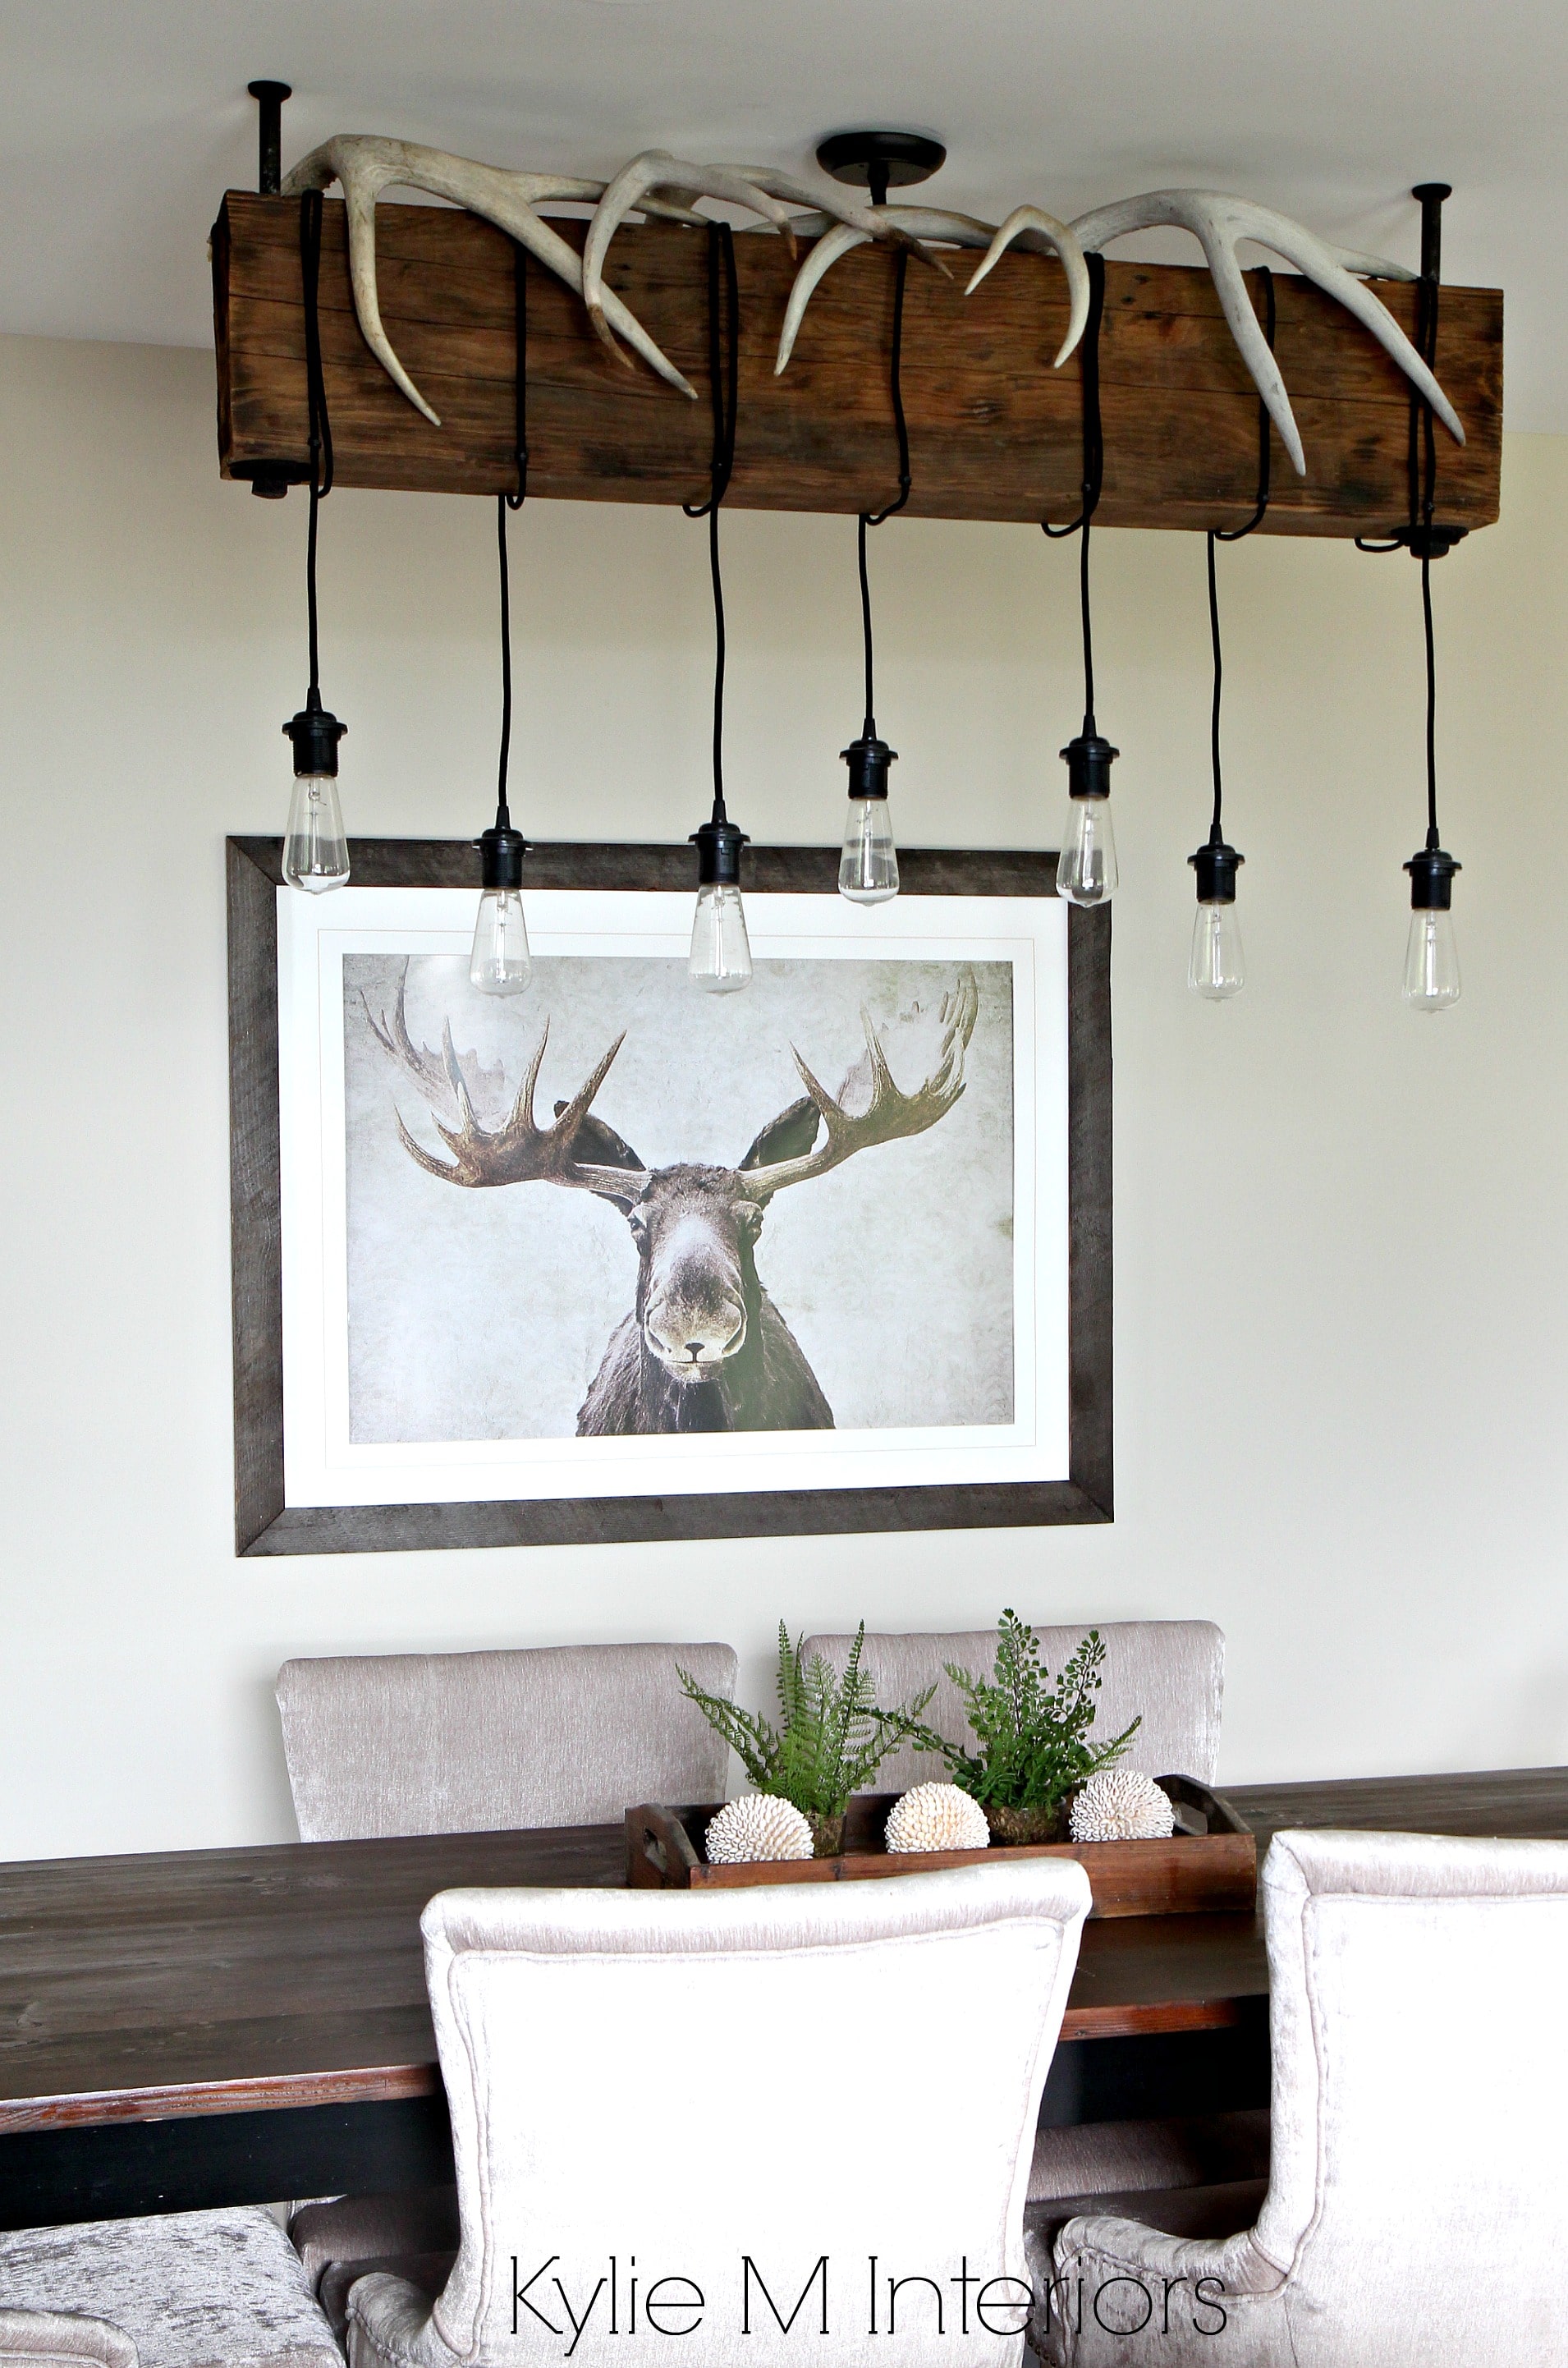 Benjamin Moore Grant Beige, Rustic, hunting decor with industrial chandelier (DIY). Kylie M Interiors DEsign Consultant, E-Design